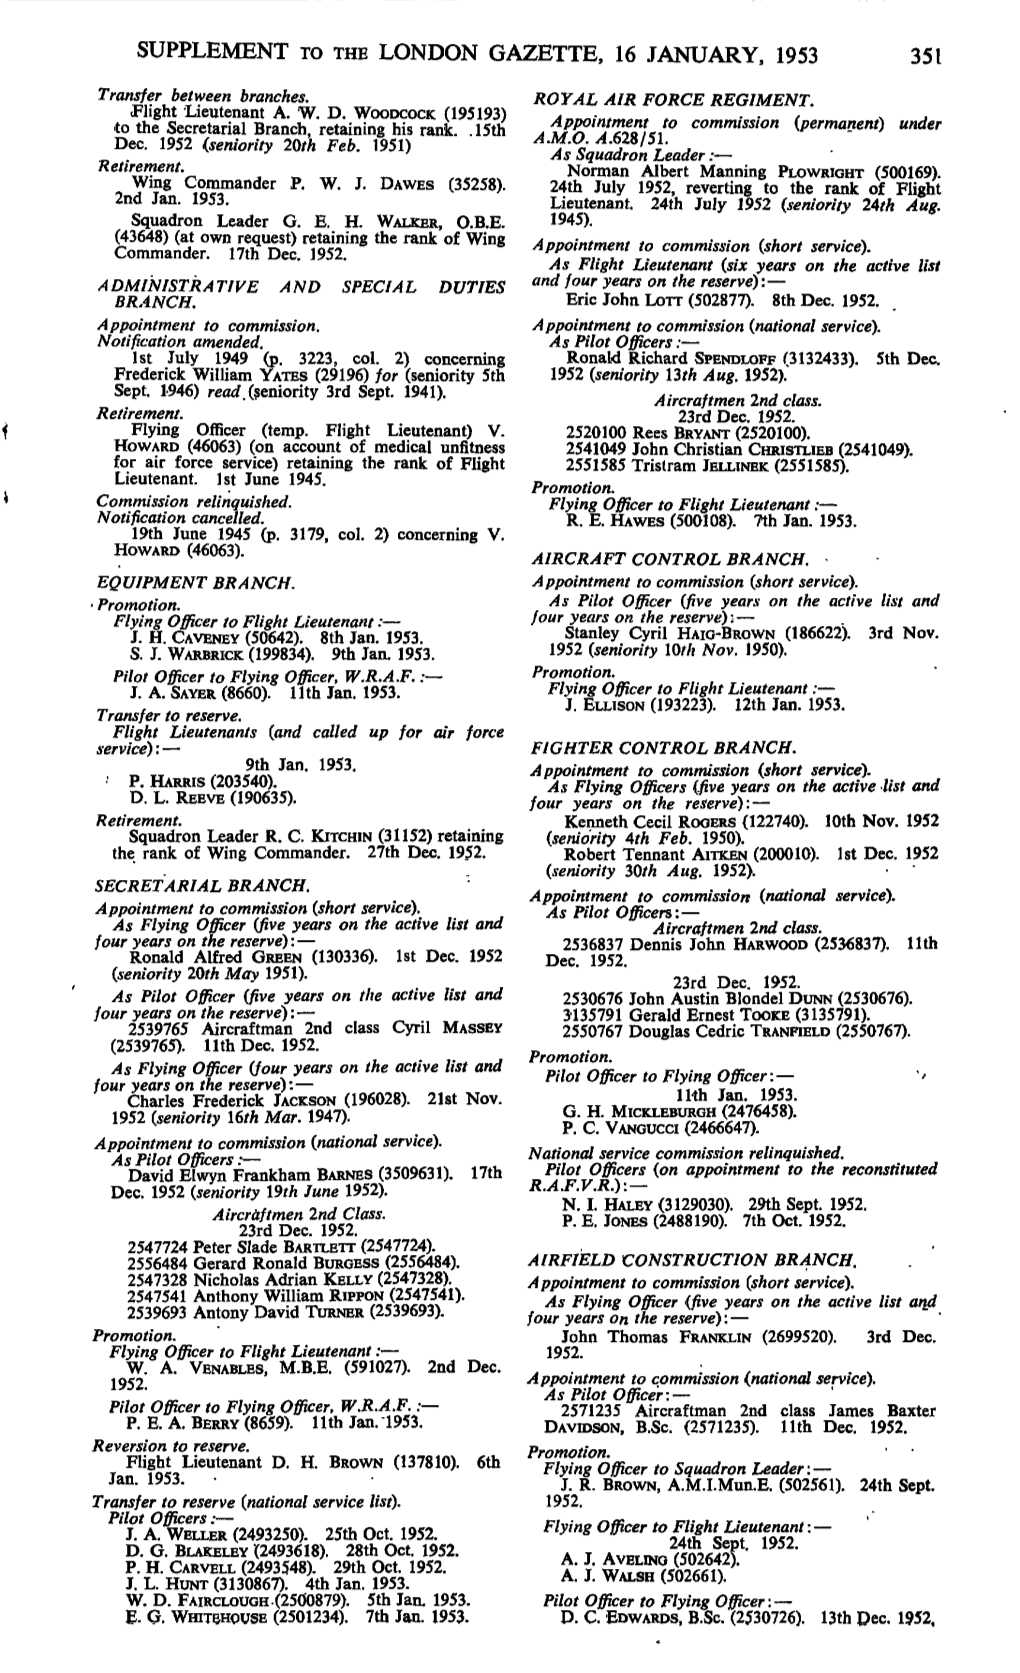 Supplement to the London Gazette, 16 January, 1953 351